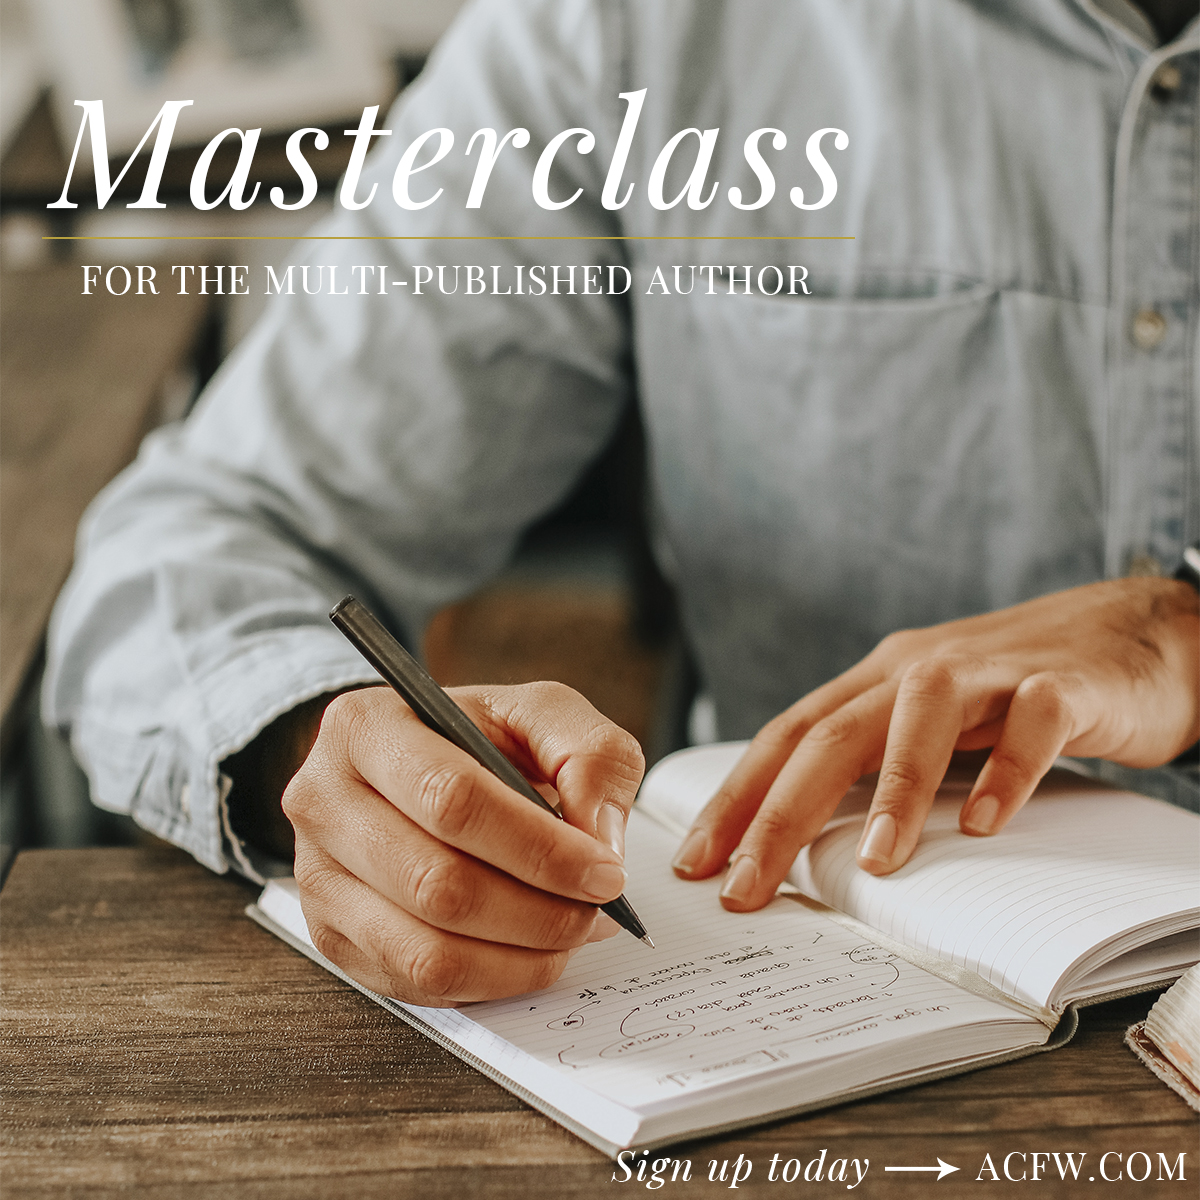 Register for Masterclass today! ➡️Be an ACFW member ➡️Have published 5 novels ➡️Looking to level up your career Learn more here: acfw.com/masterclass-re…